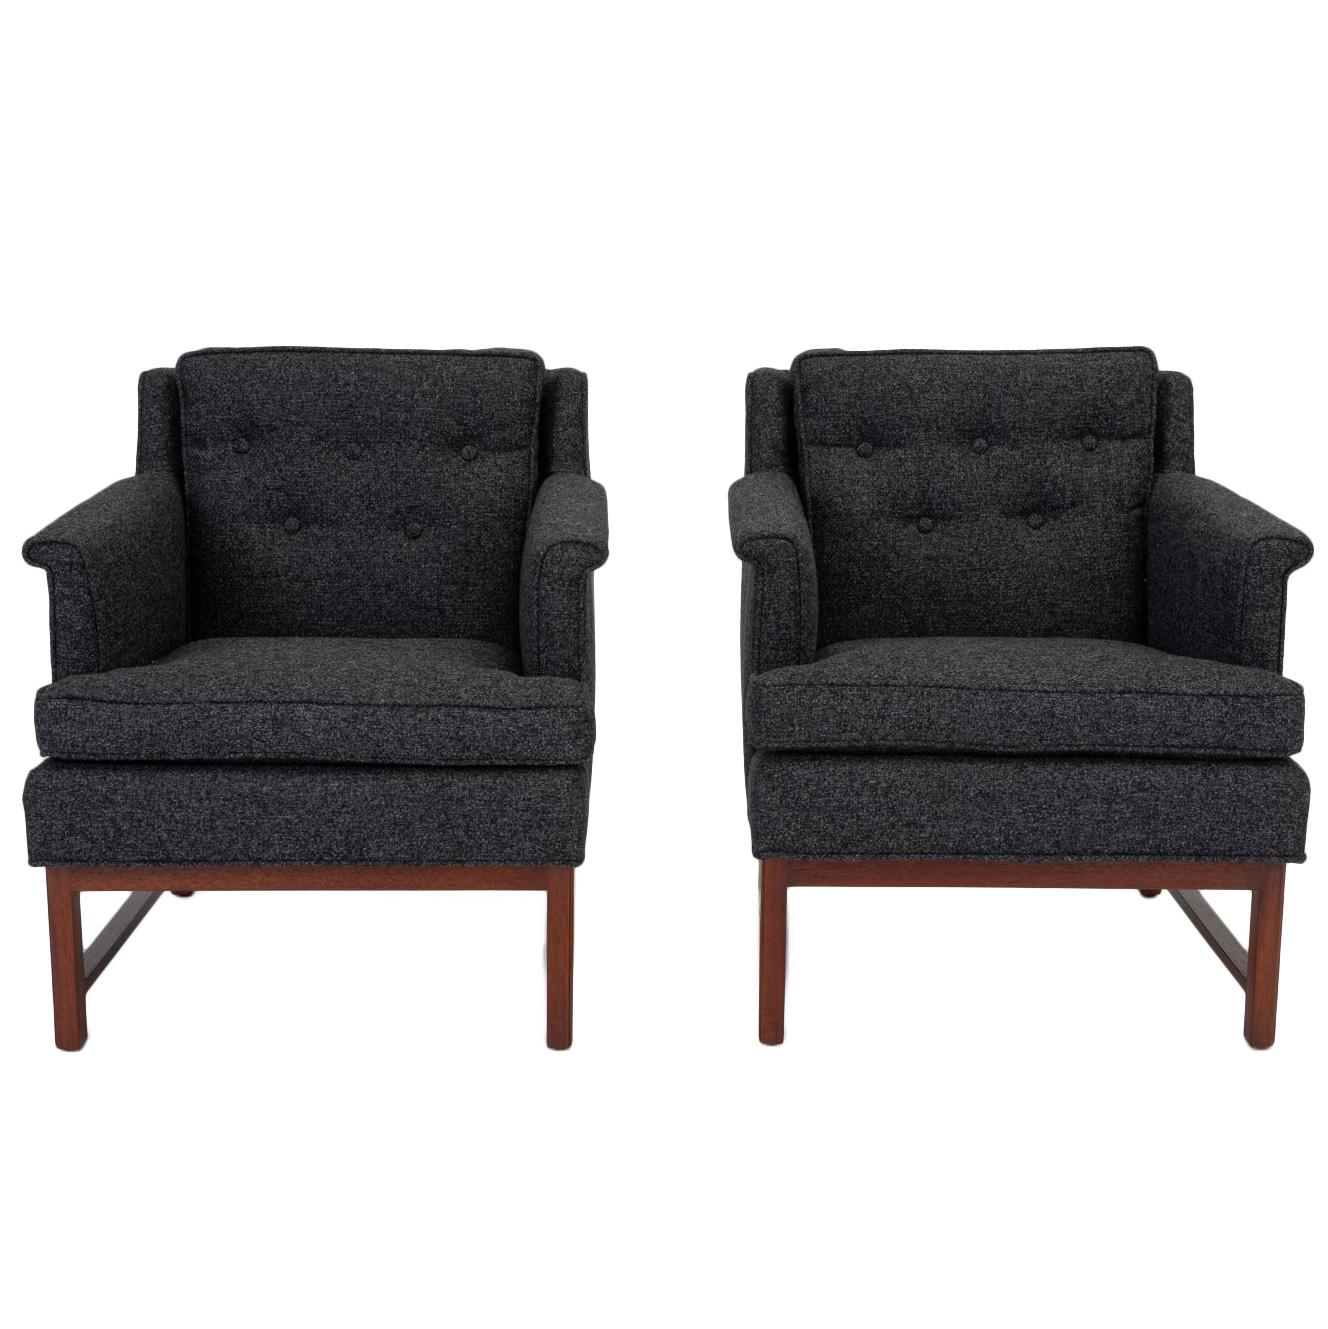 Pair of Petite Lounge Chairs by Edward Wormley for Dunbar